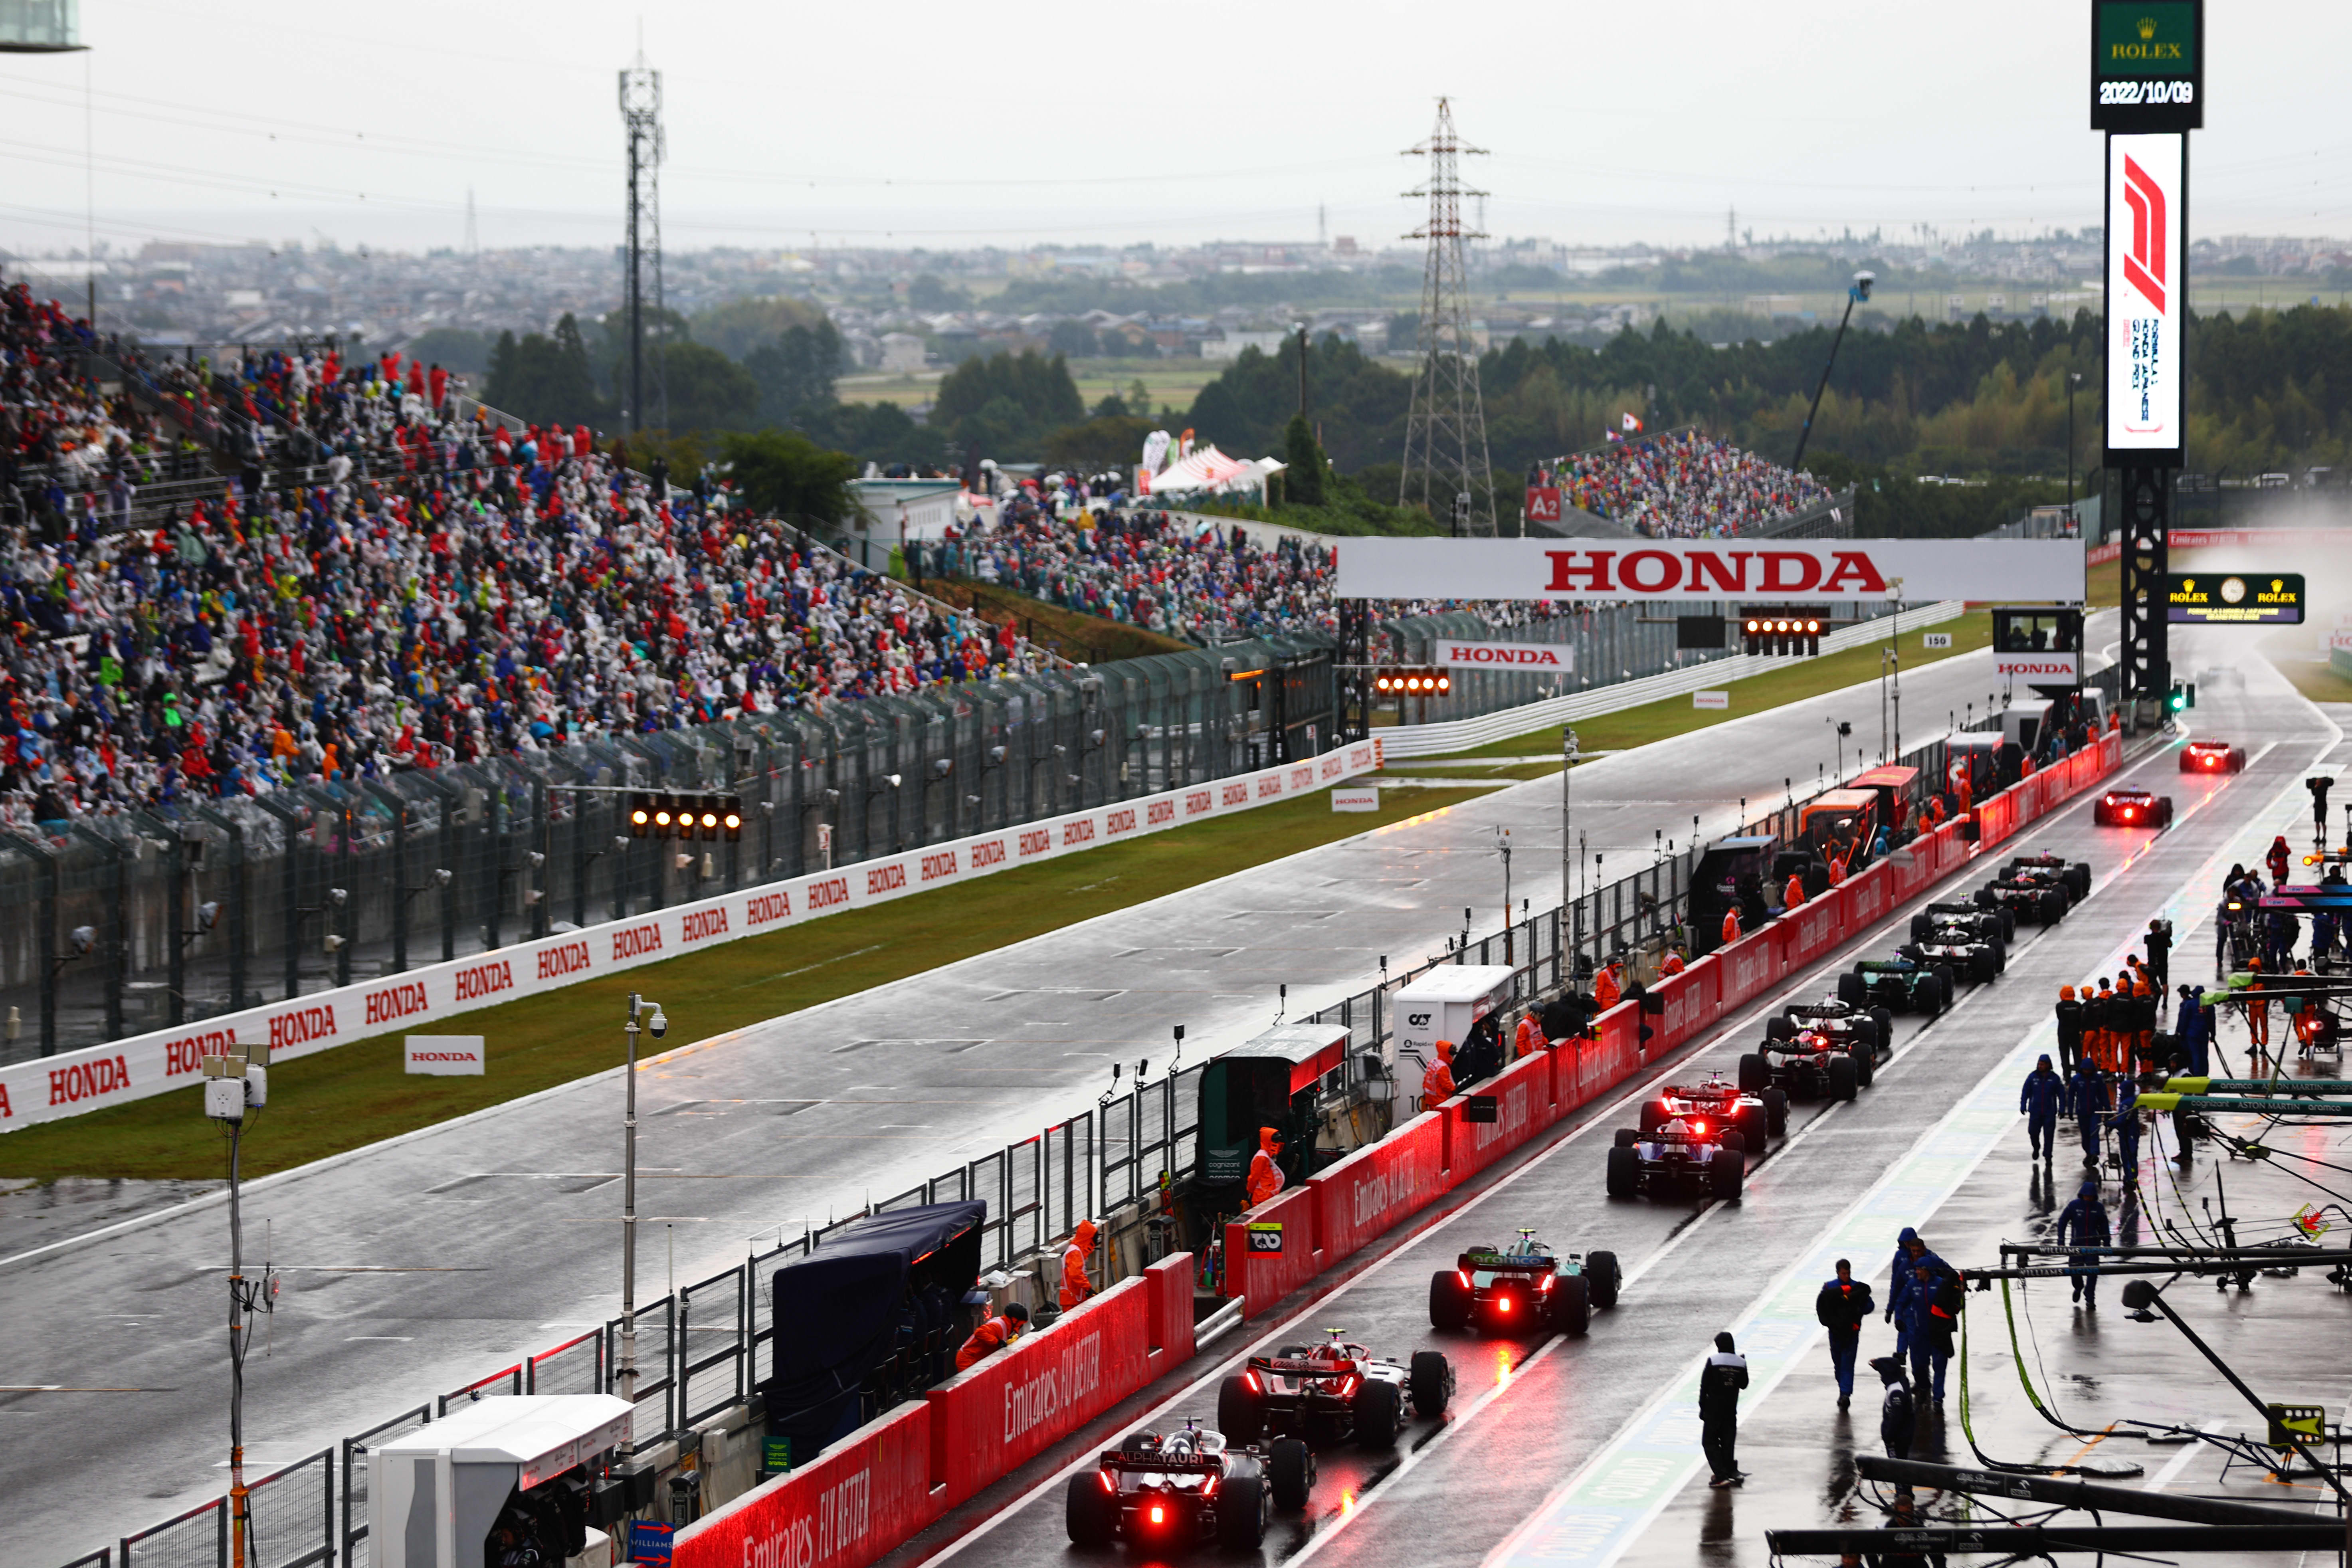 Formula One shares can rally nearly 40% thanks to favorable commercial rights deal